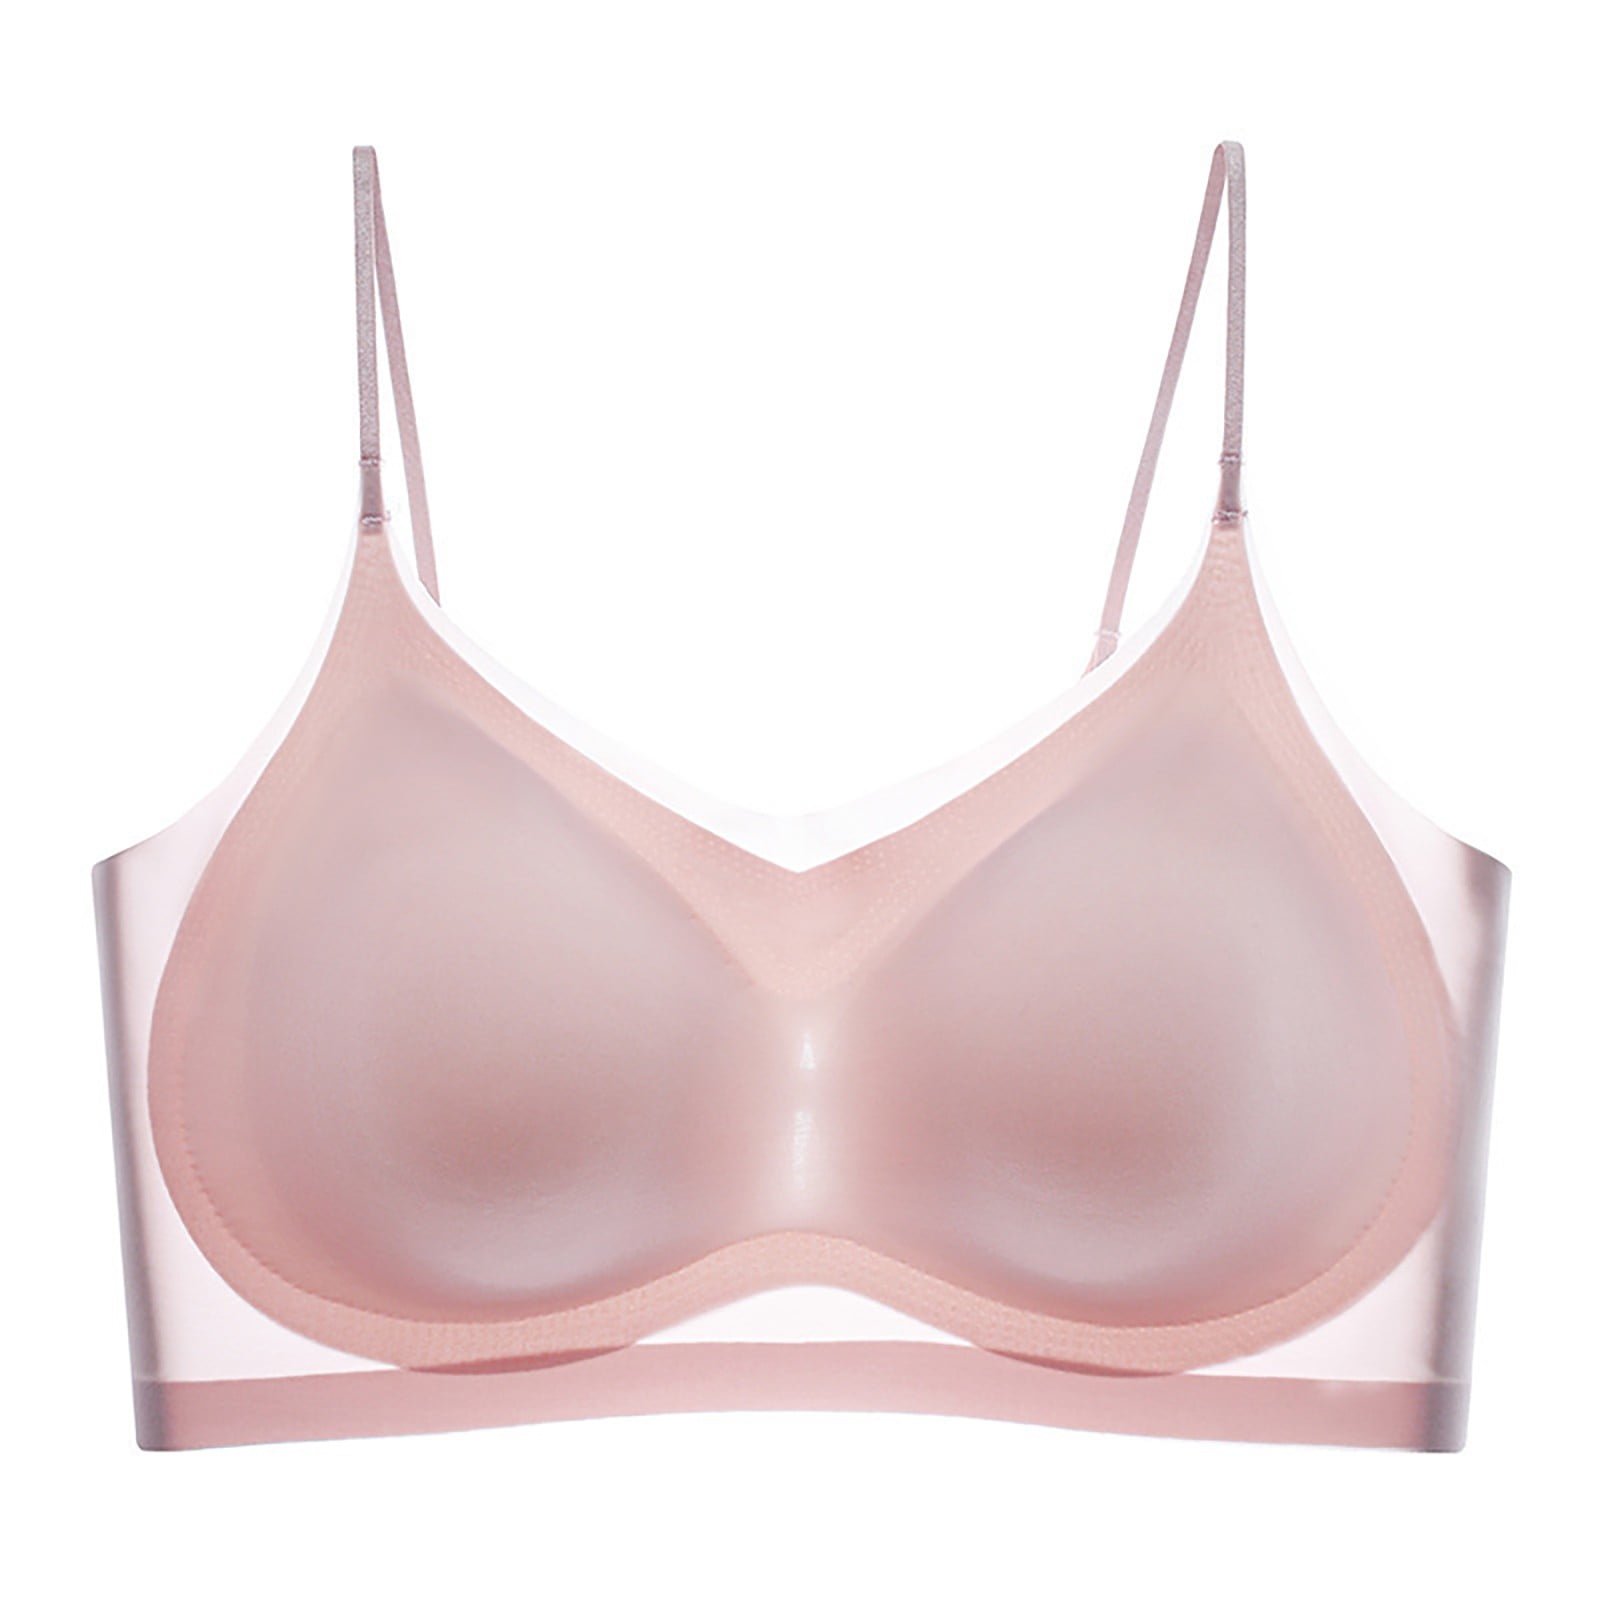 Pseurrlt Ultra-thin summer comfort bra made of ice silk in plus size, ultra-thin  ice silk bra, ice silk air bra with removable padding, breathable and  lightweight, seamless bra for sleeping yoga 